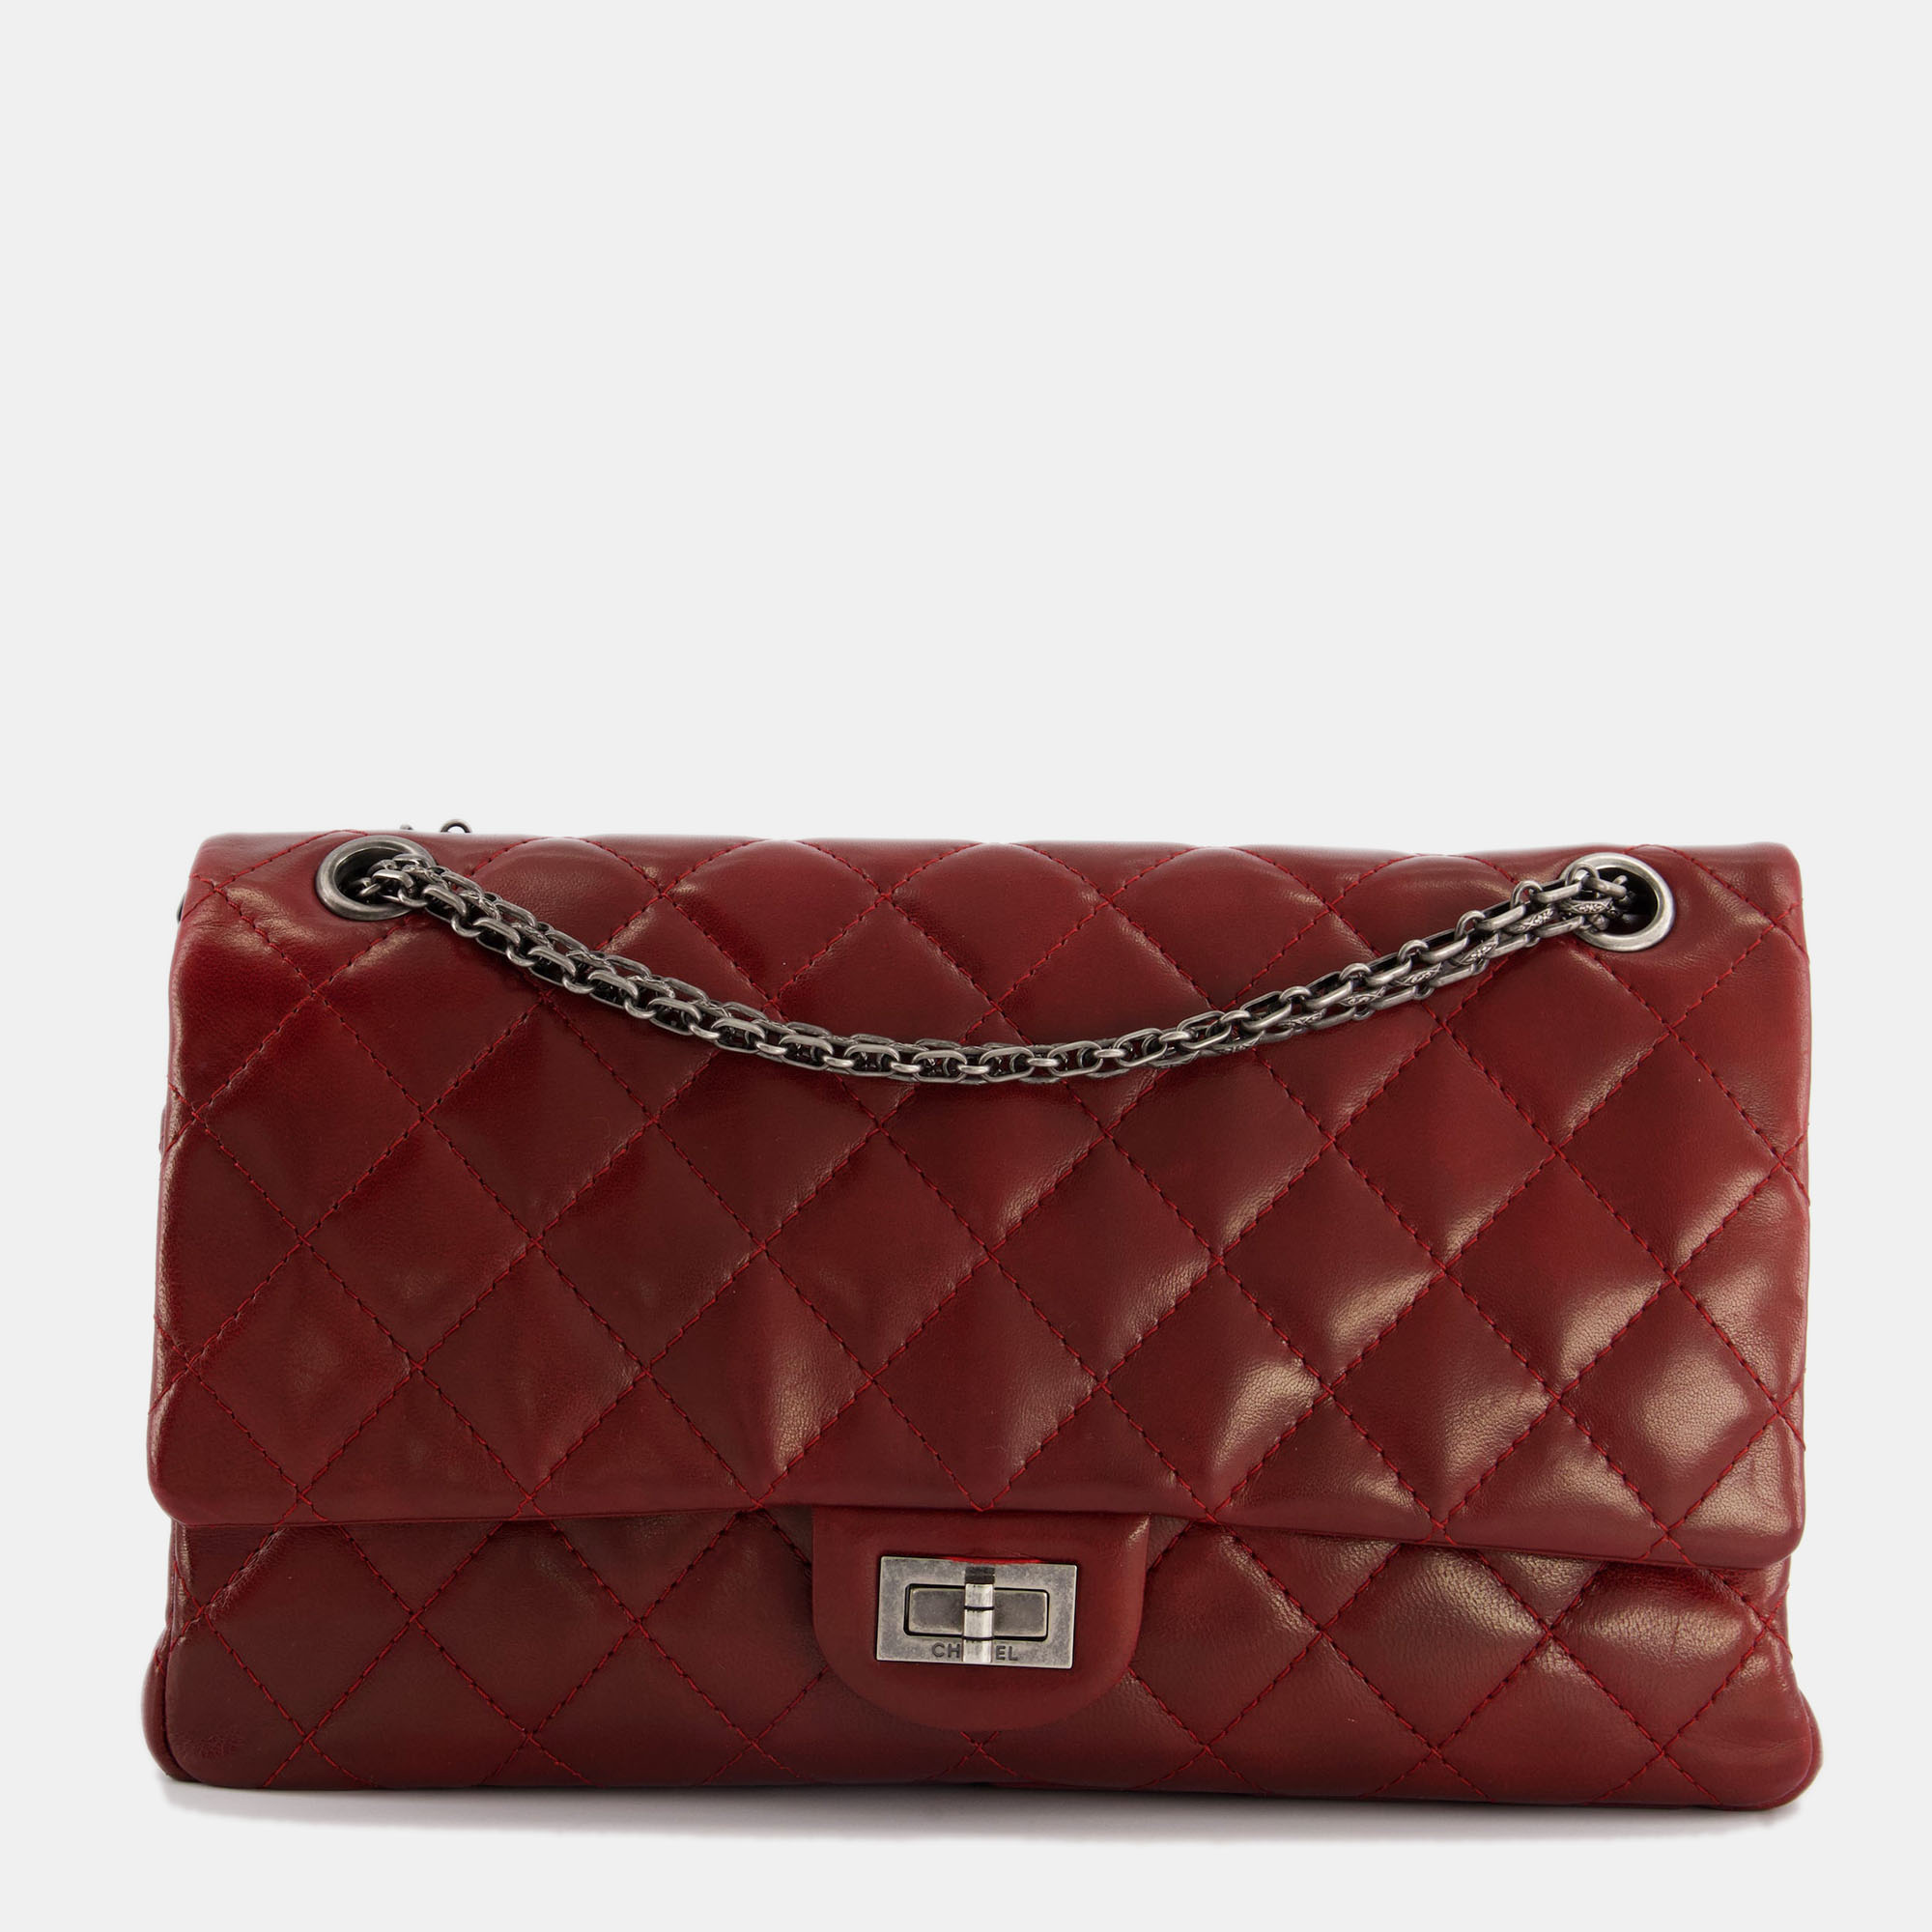 Chanel deep red medium reissue bag in lambskin leather with ruthenium hardware